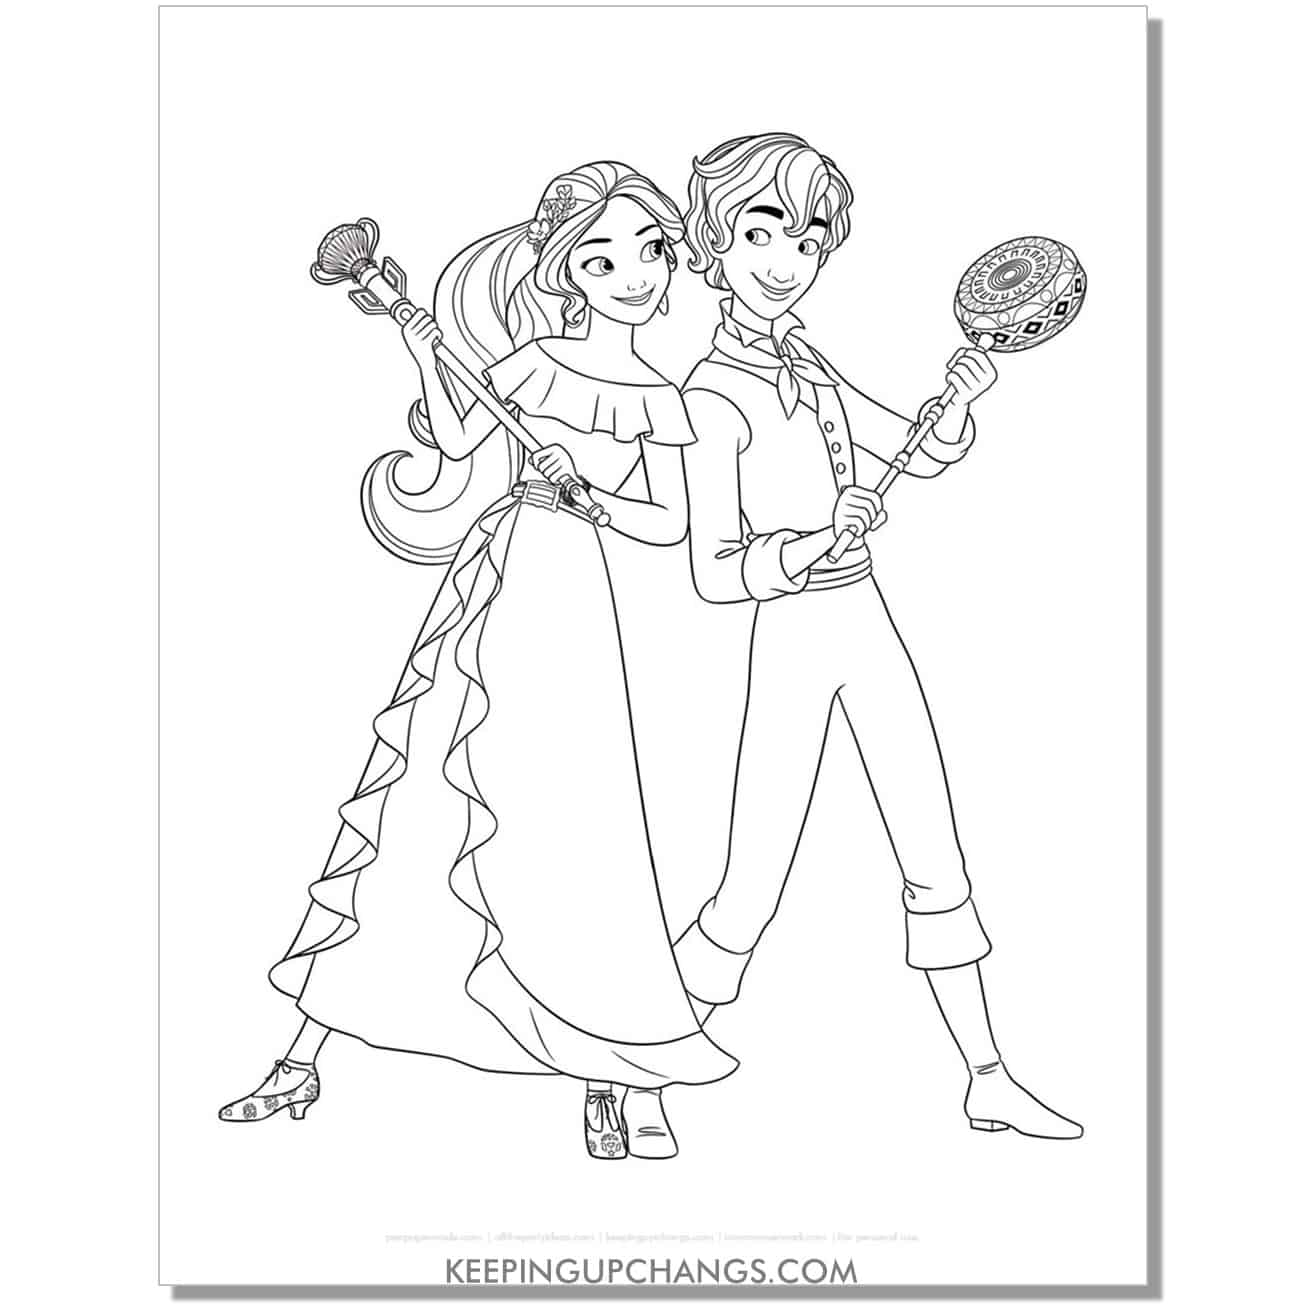 elena and mateo side by side coloring page, sheet.